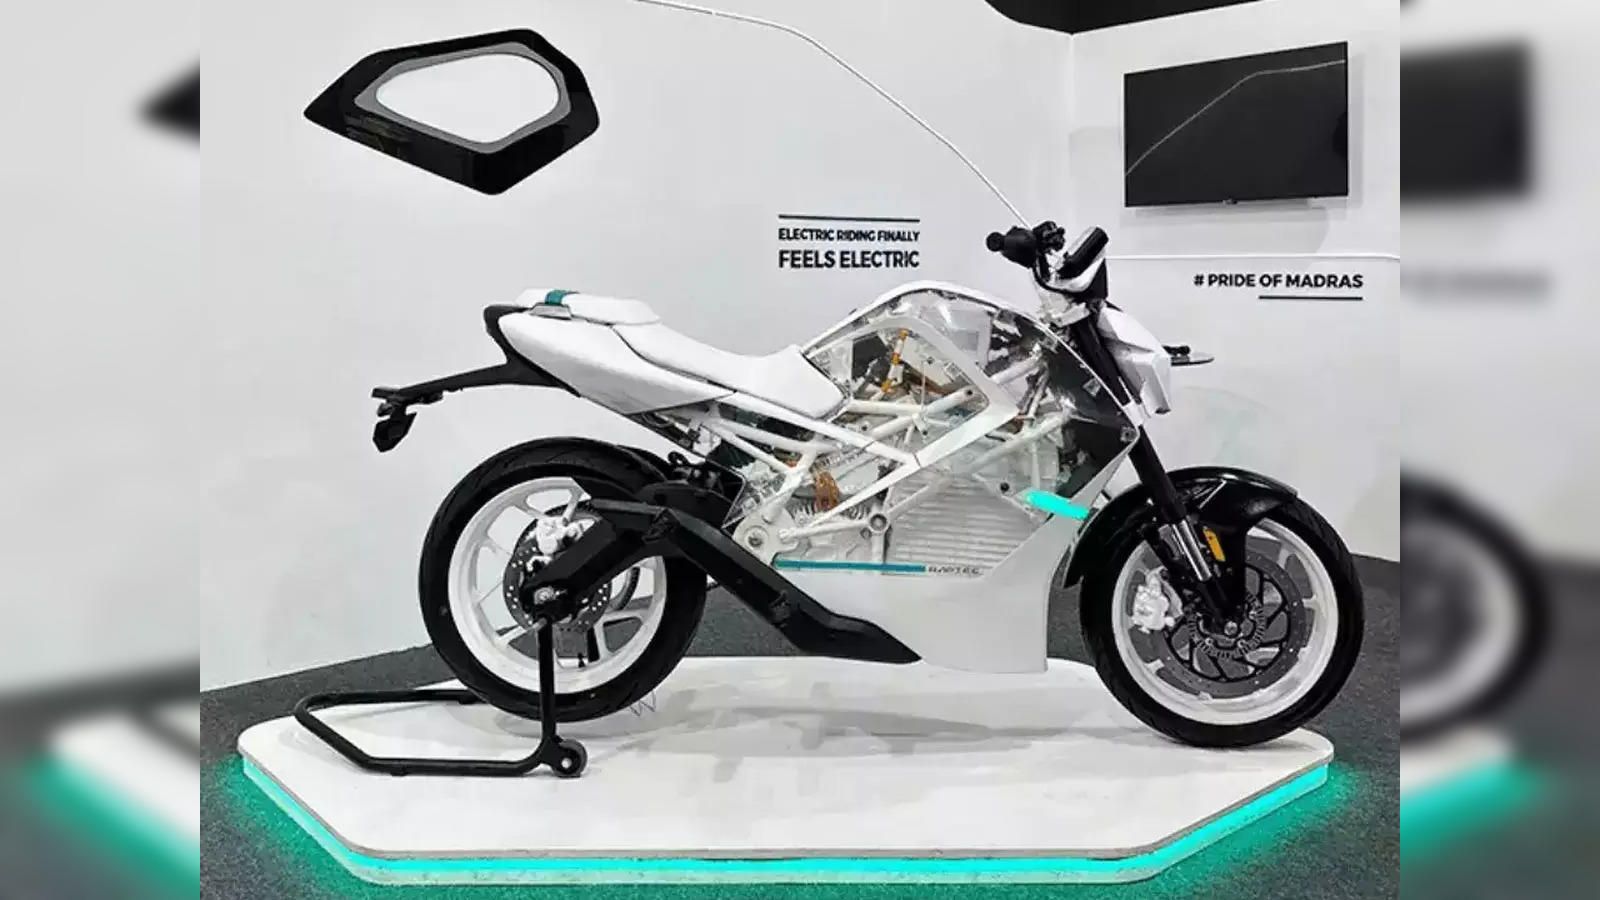 NOVUS an electric motorcycle with power, range & performance